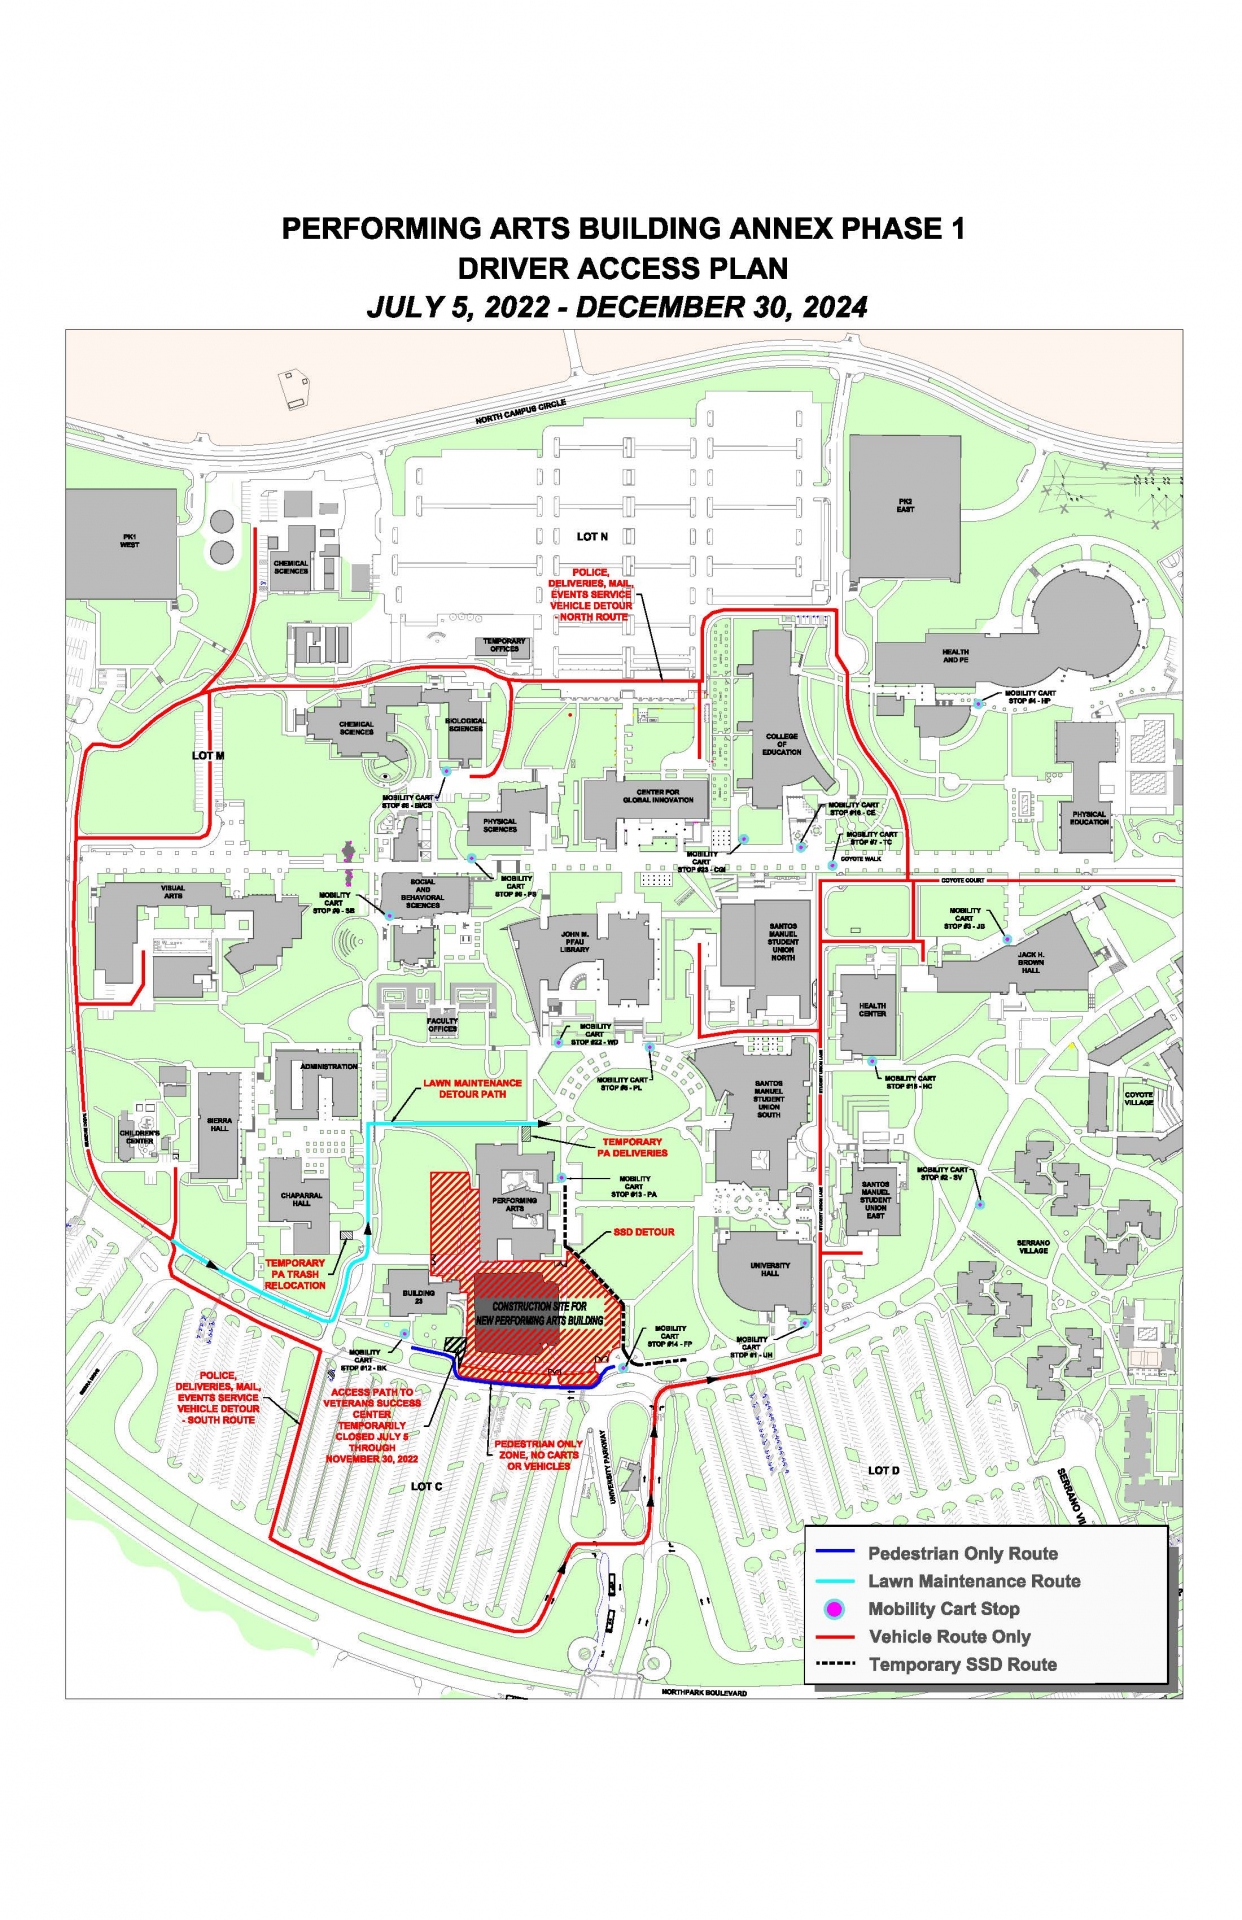 Campus map, phase 1 driver access plan, Performing Arts Building Project